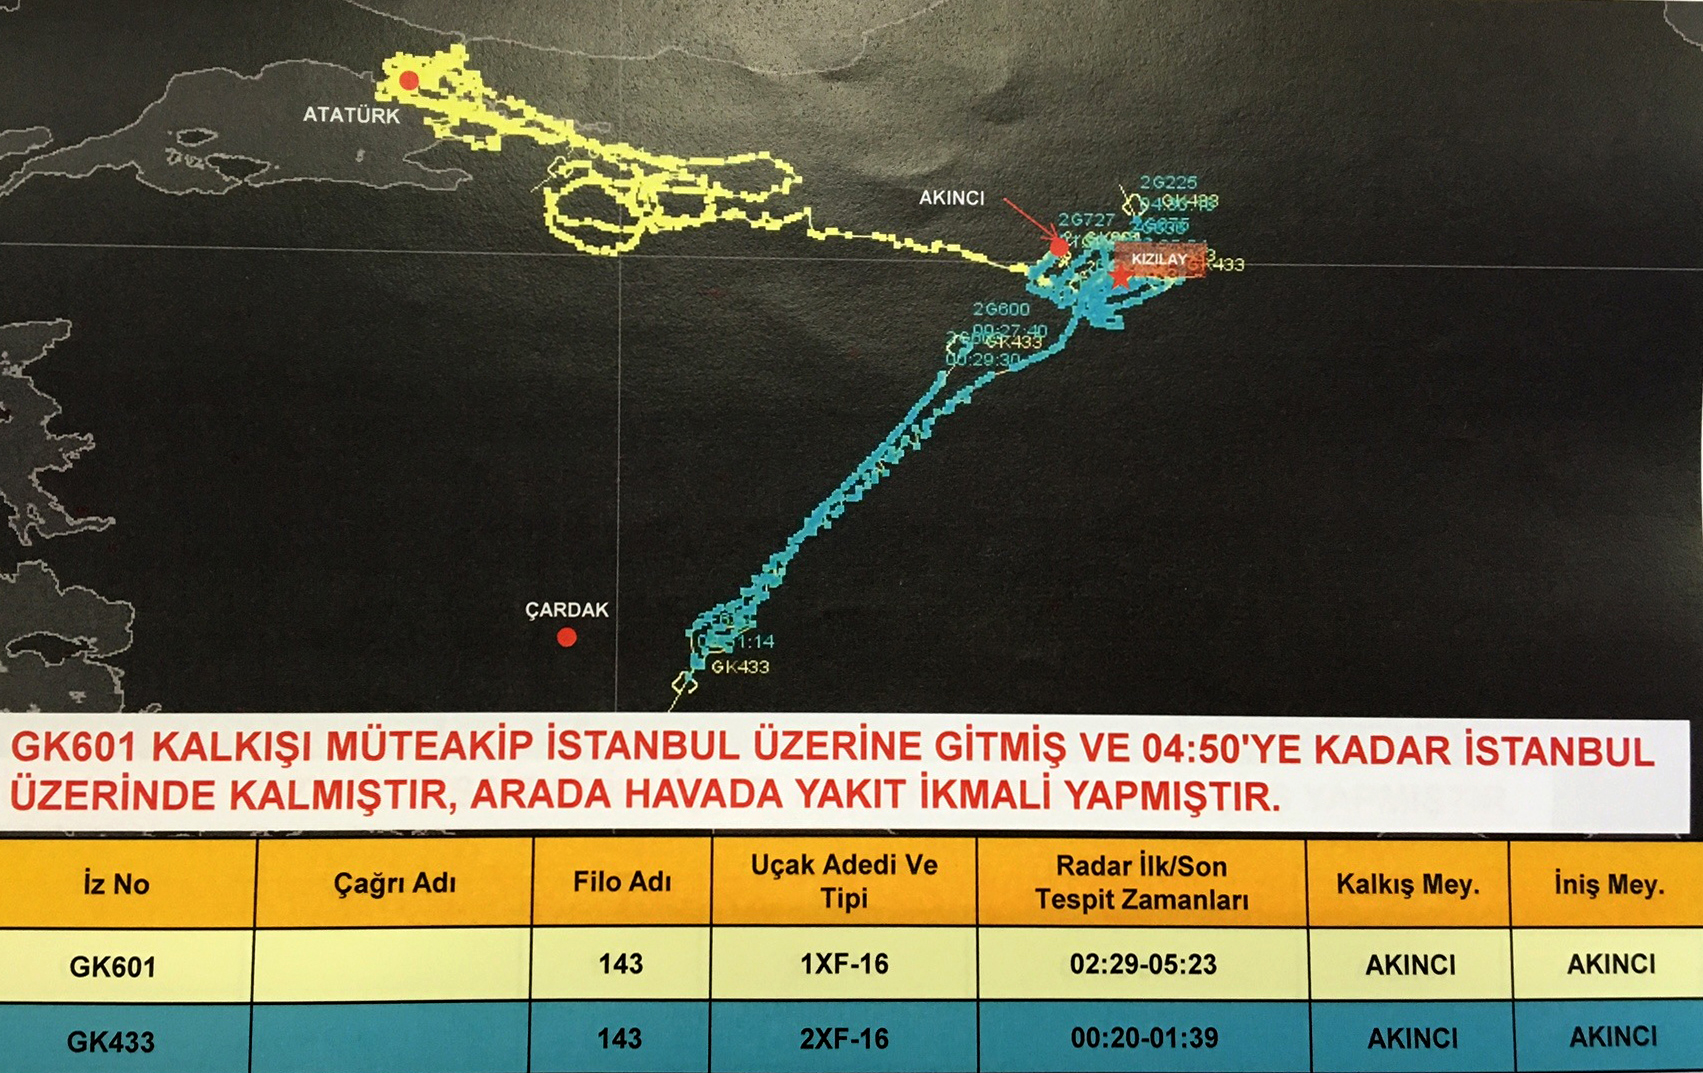 According to flight records, there was heavy air traffic in the skies above Istanbul and Ankara.